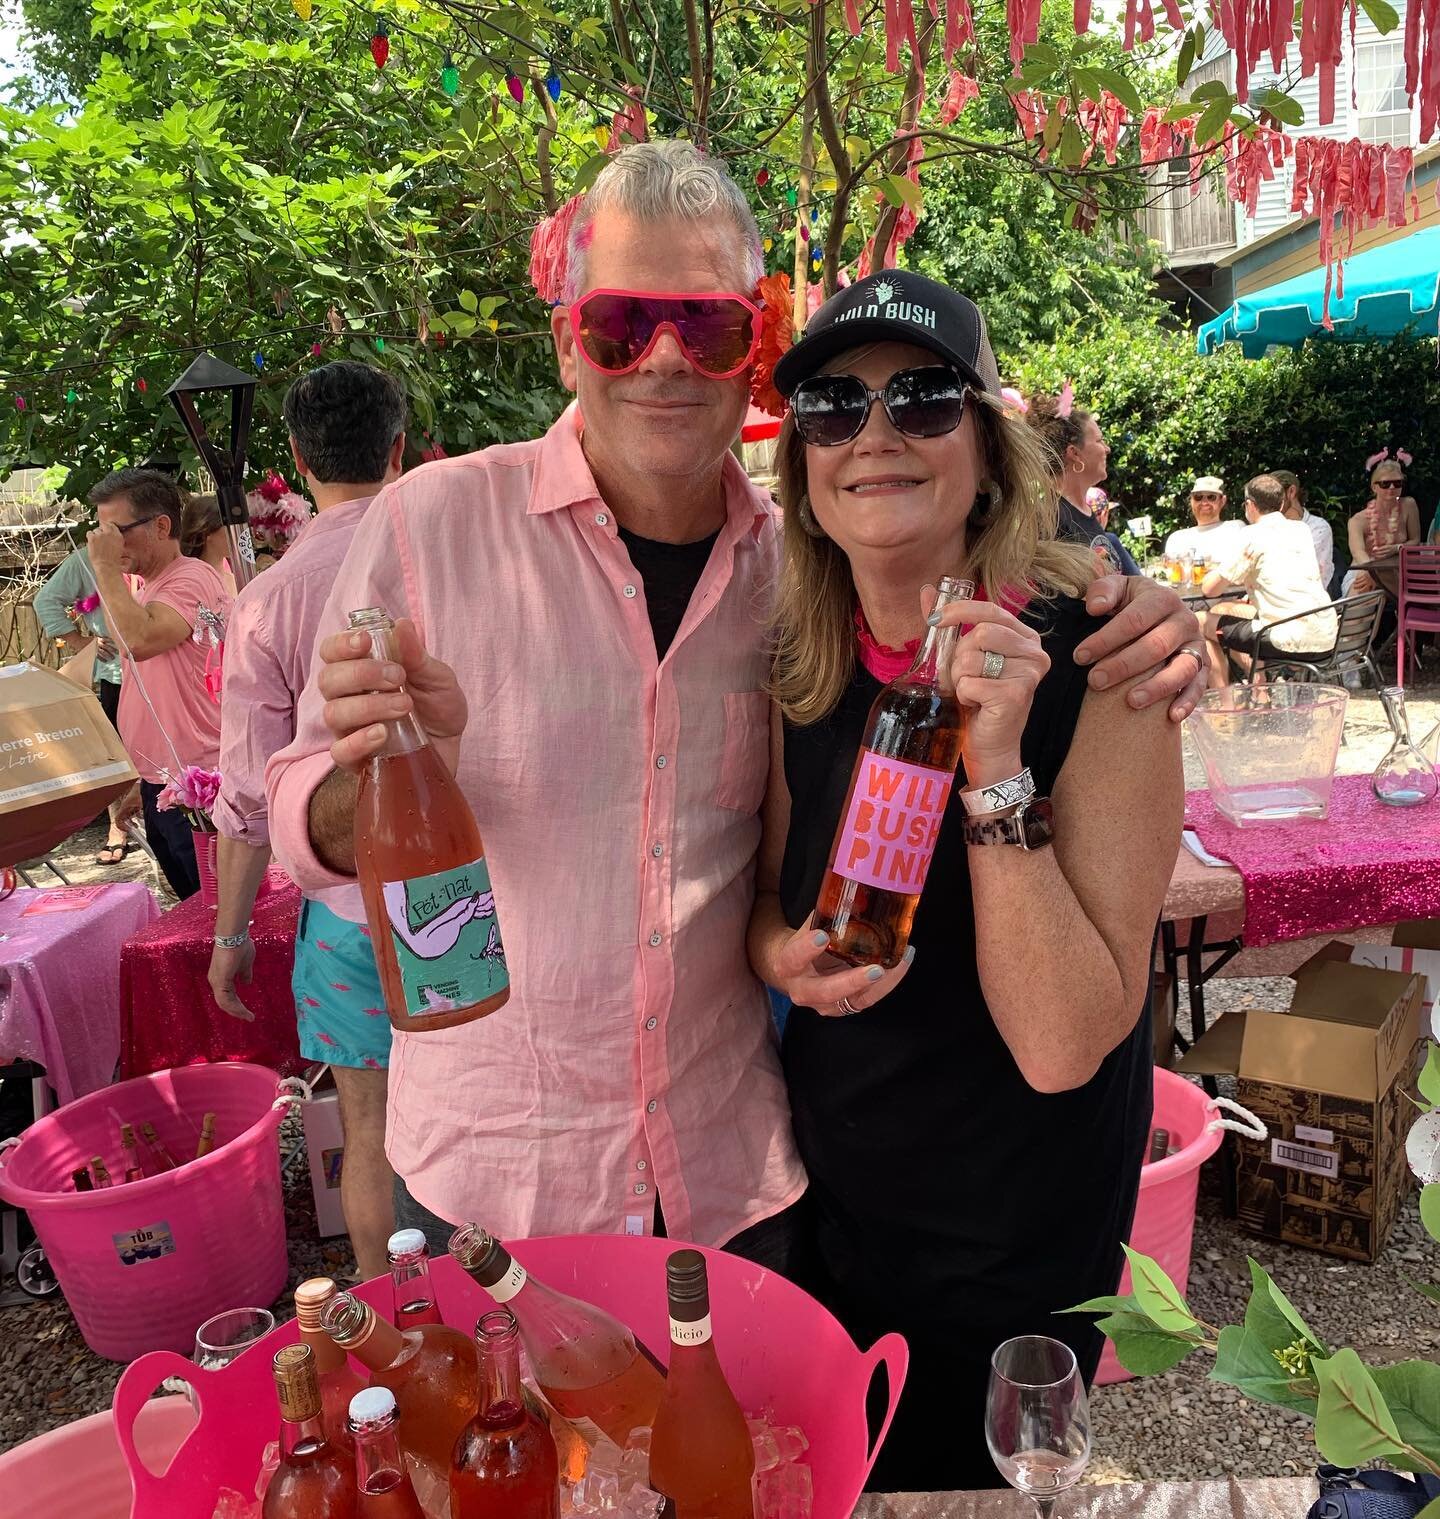 Neil and his amazing sister Laura will be pouring some #petgnat and #wildbushpink @bacchanalwine for the annual all things pink extravaganza called Rose Fest! Pop over, say hi and try some tasty wine!